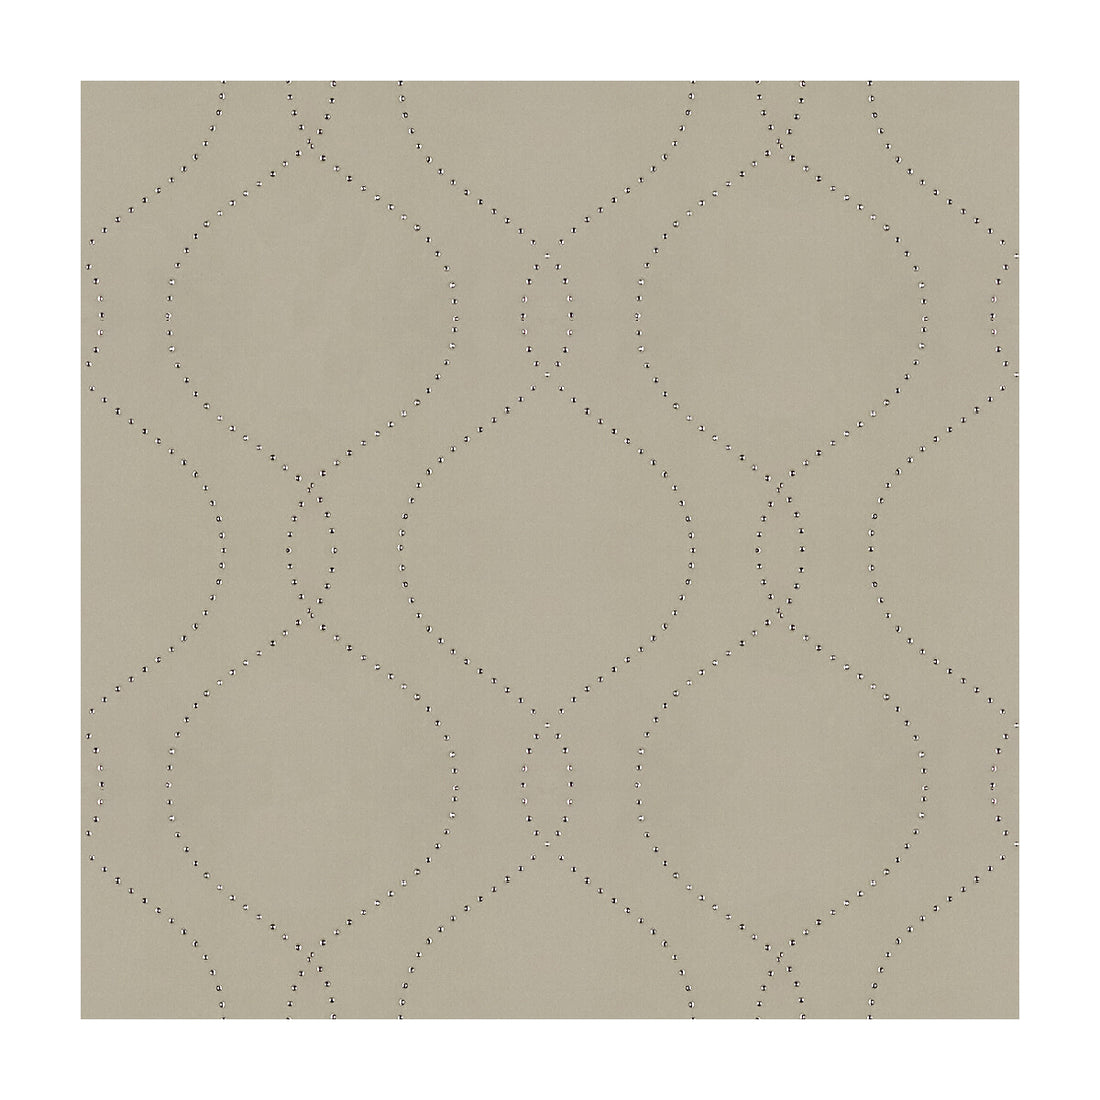 Avah fabric in pewter color - pattern 4197.16.0 - by Kravet Design in the Candice Olson collection